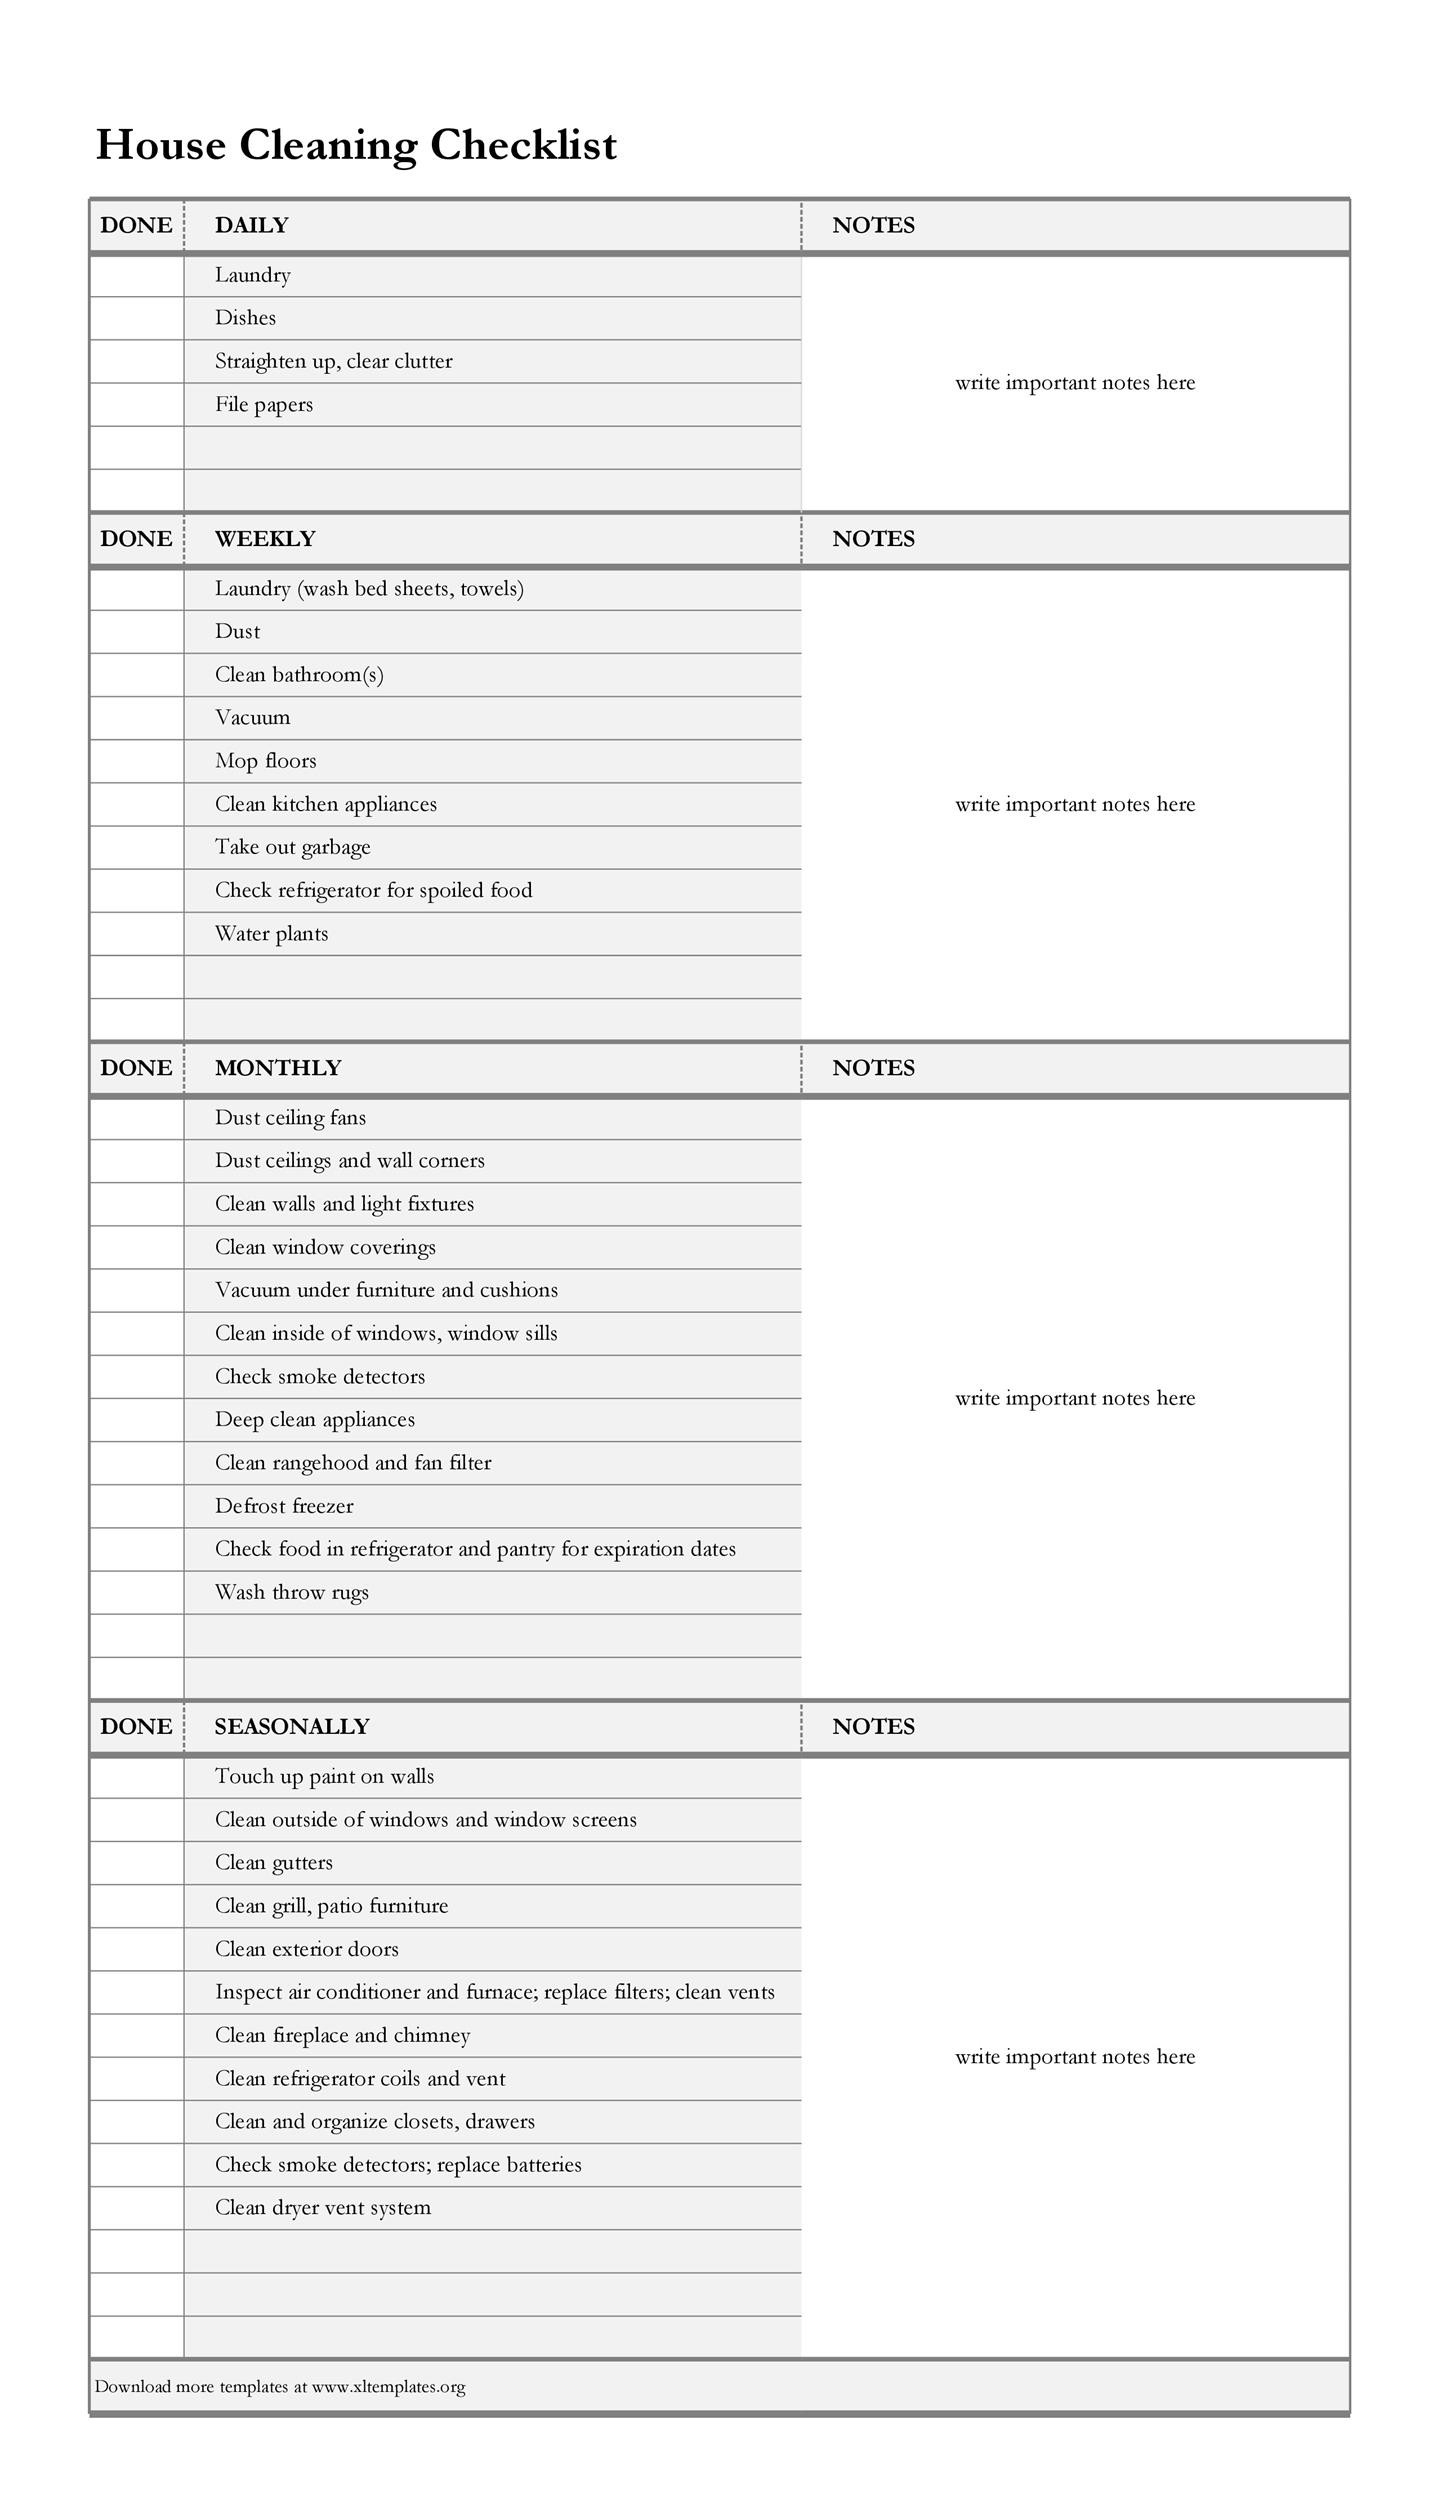 11 Printable House Cleaning Checklist Templates ᐅ TemplateLab With Regard To Housekeeper Checklist Template Inside Housekeeper Checklist Template